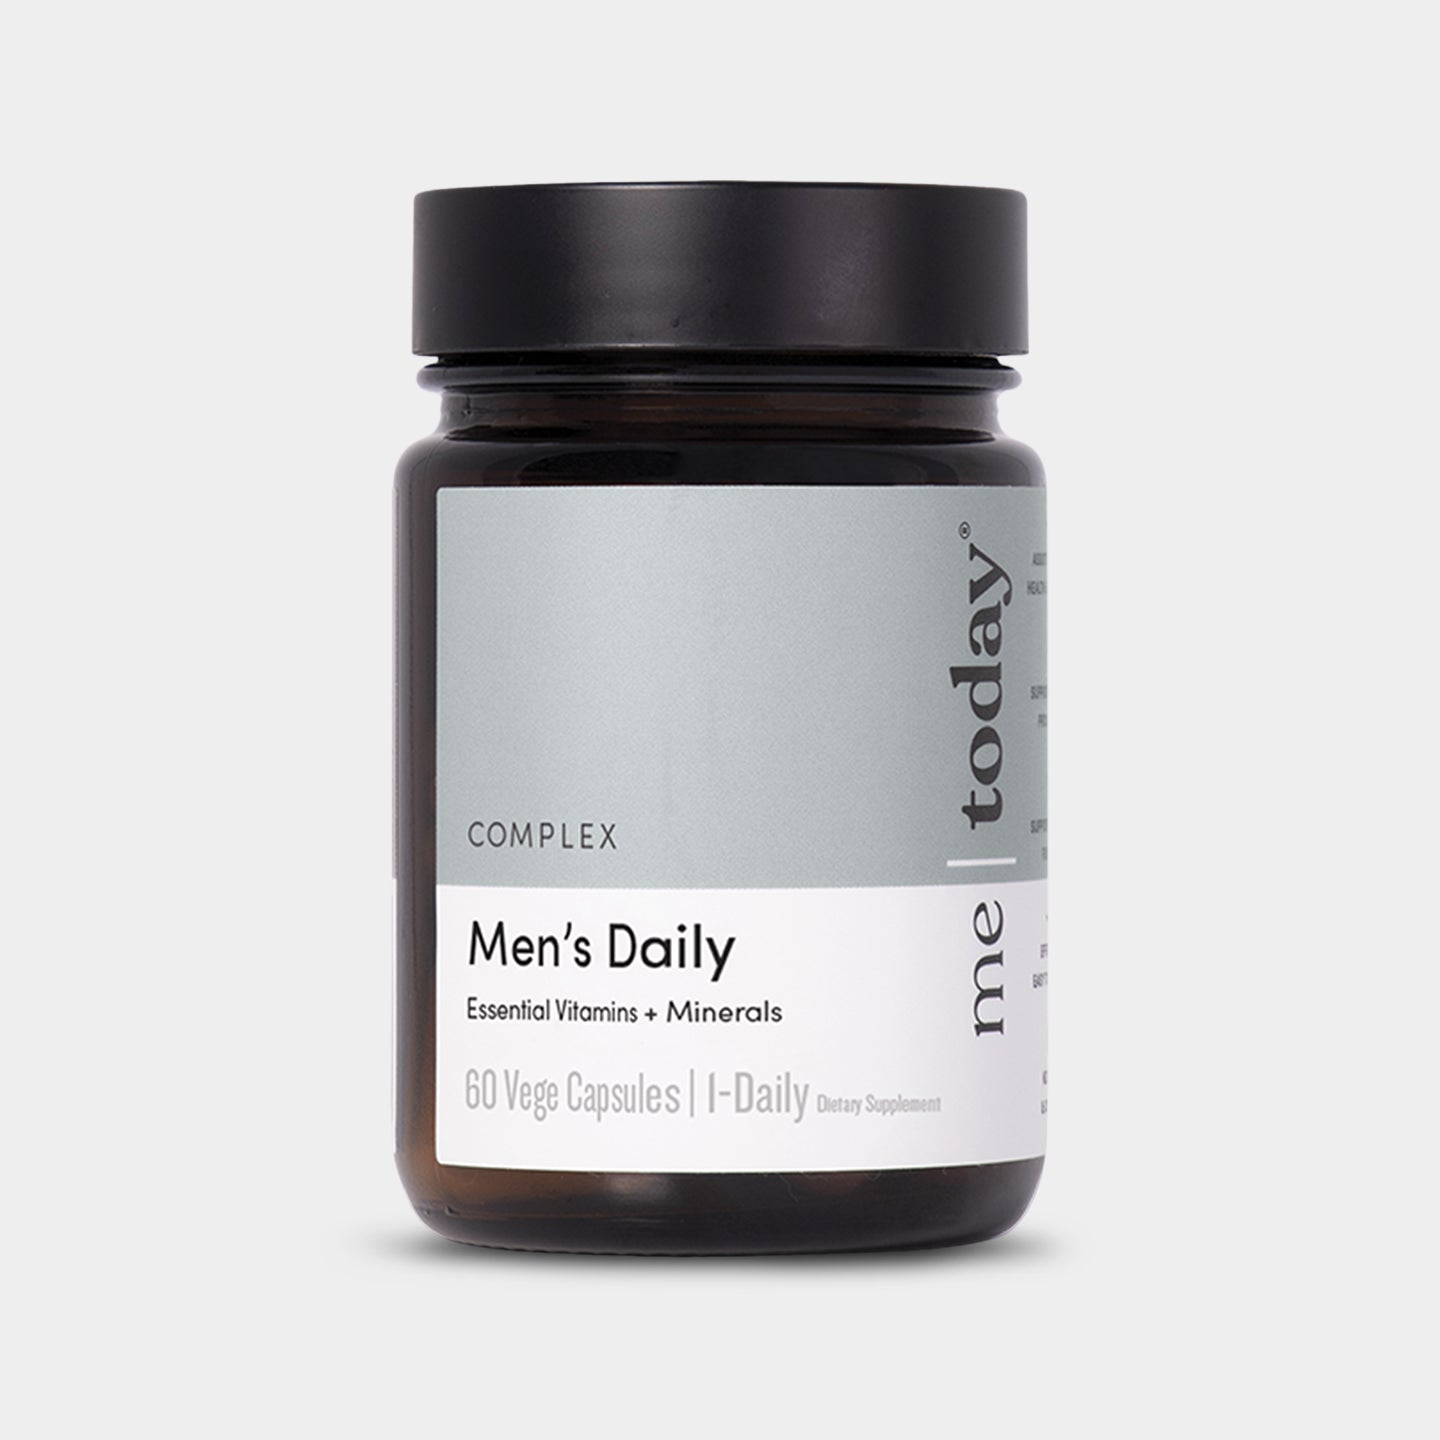 Me Today Men's Daily Main